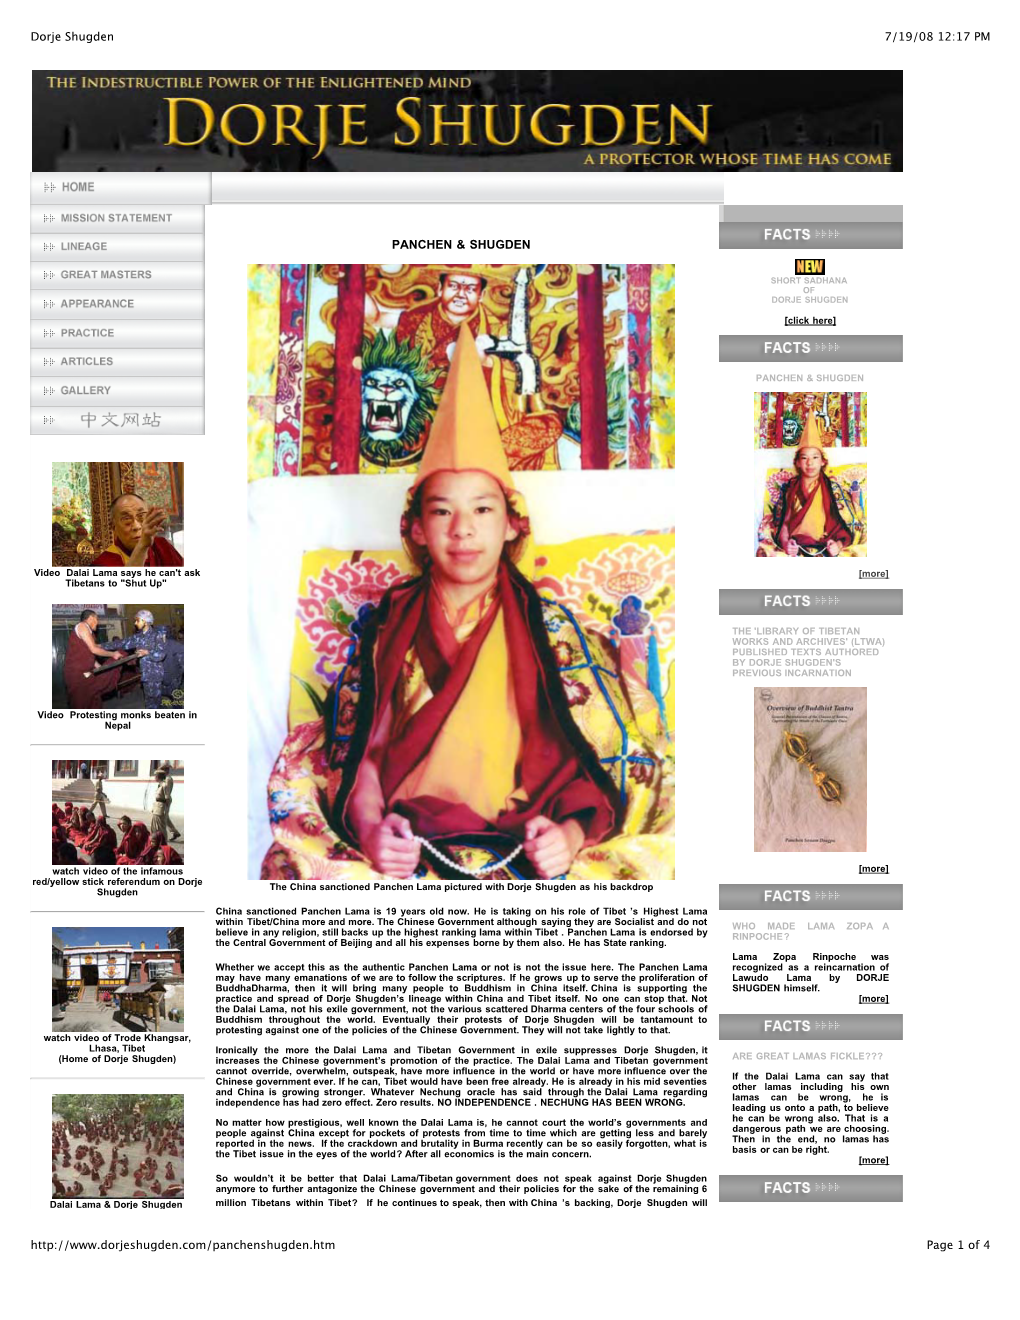 'Panchen Lama' of the Chinese Government Placed in Front of A